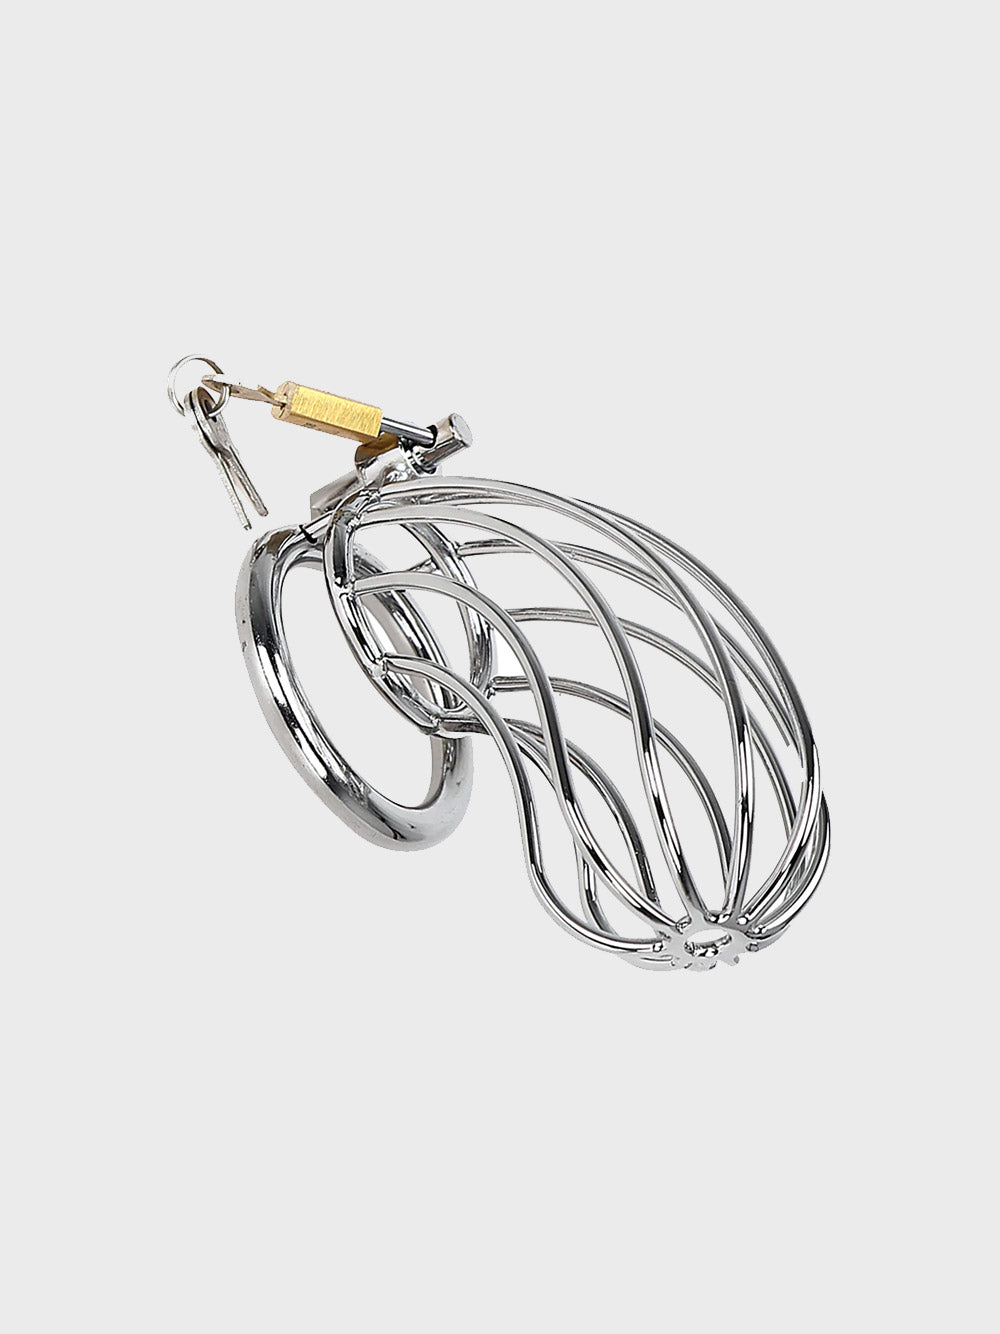 a locked chastity cage which is popular in adult films.